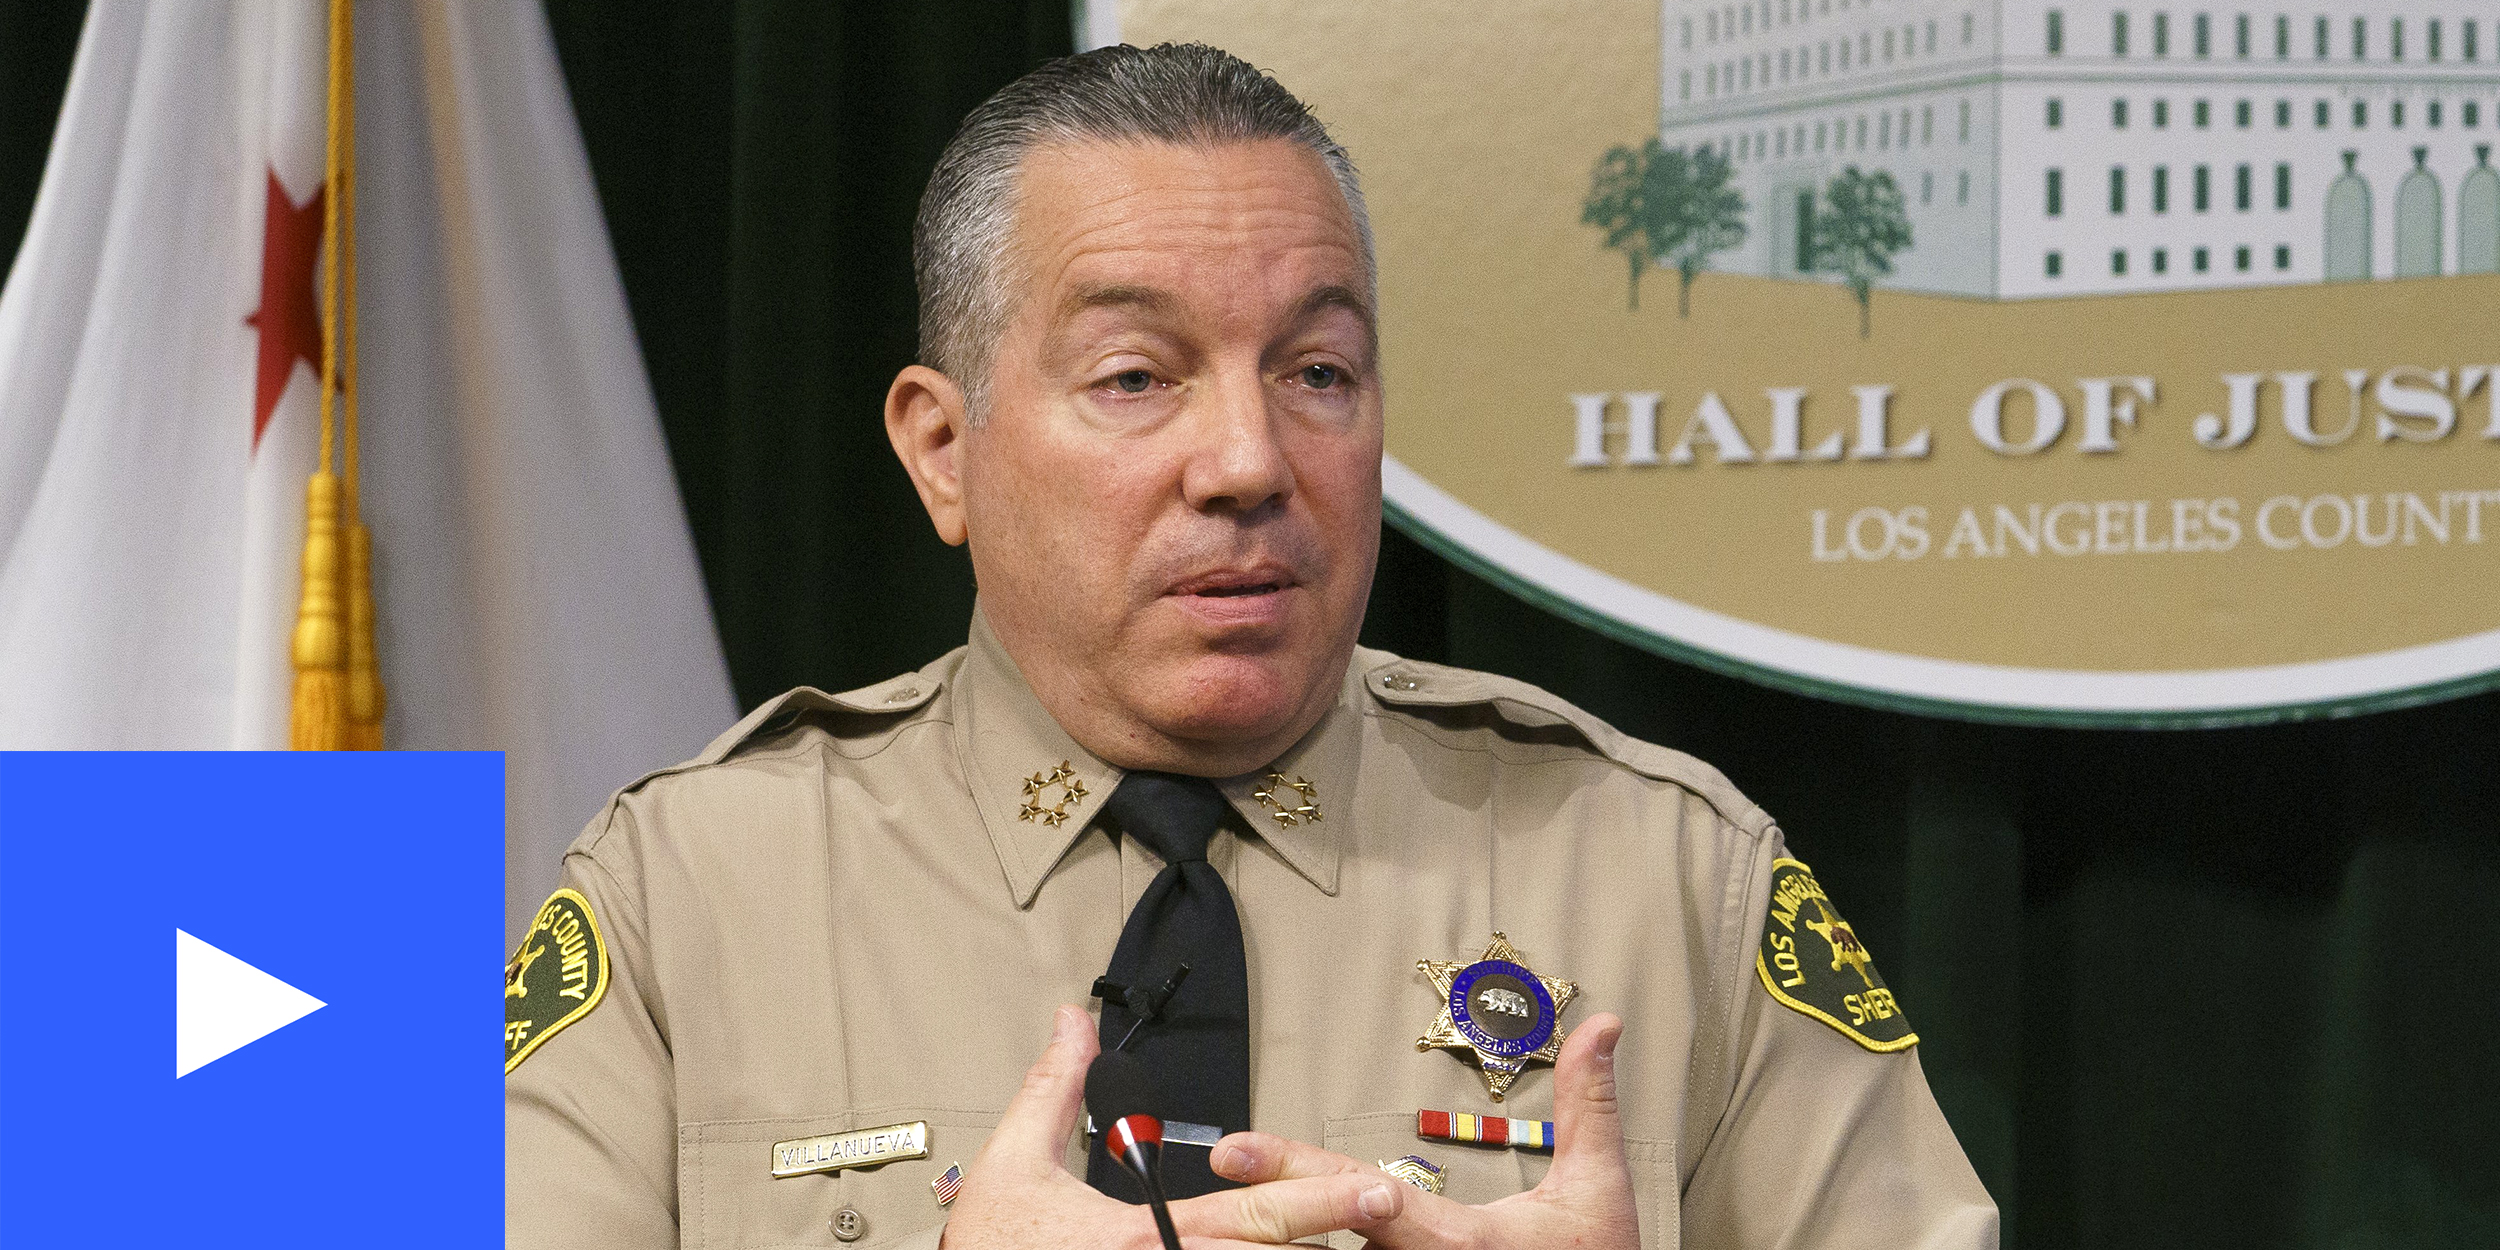 A photo of the L.A. County Sheriff 